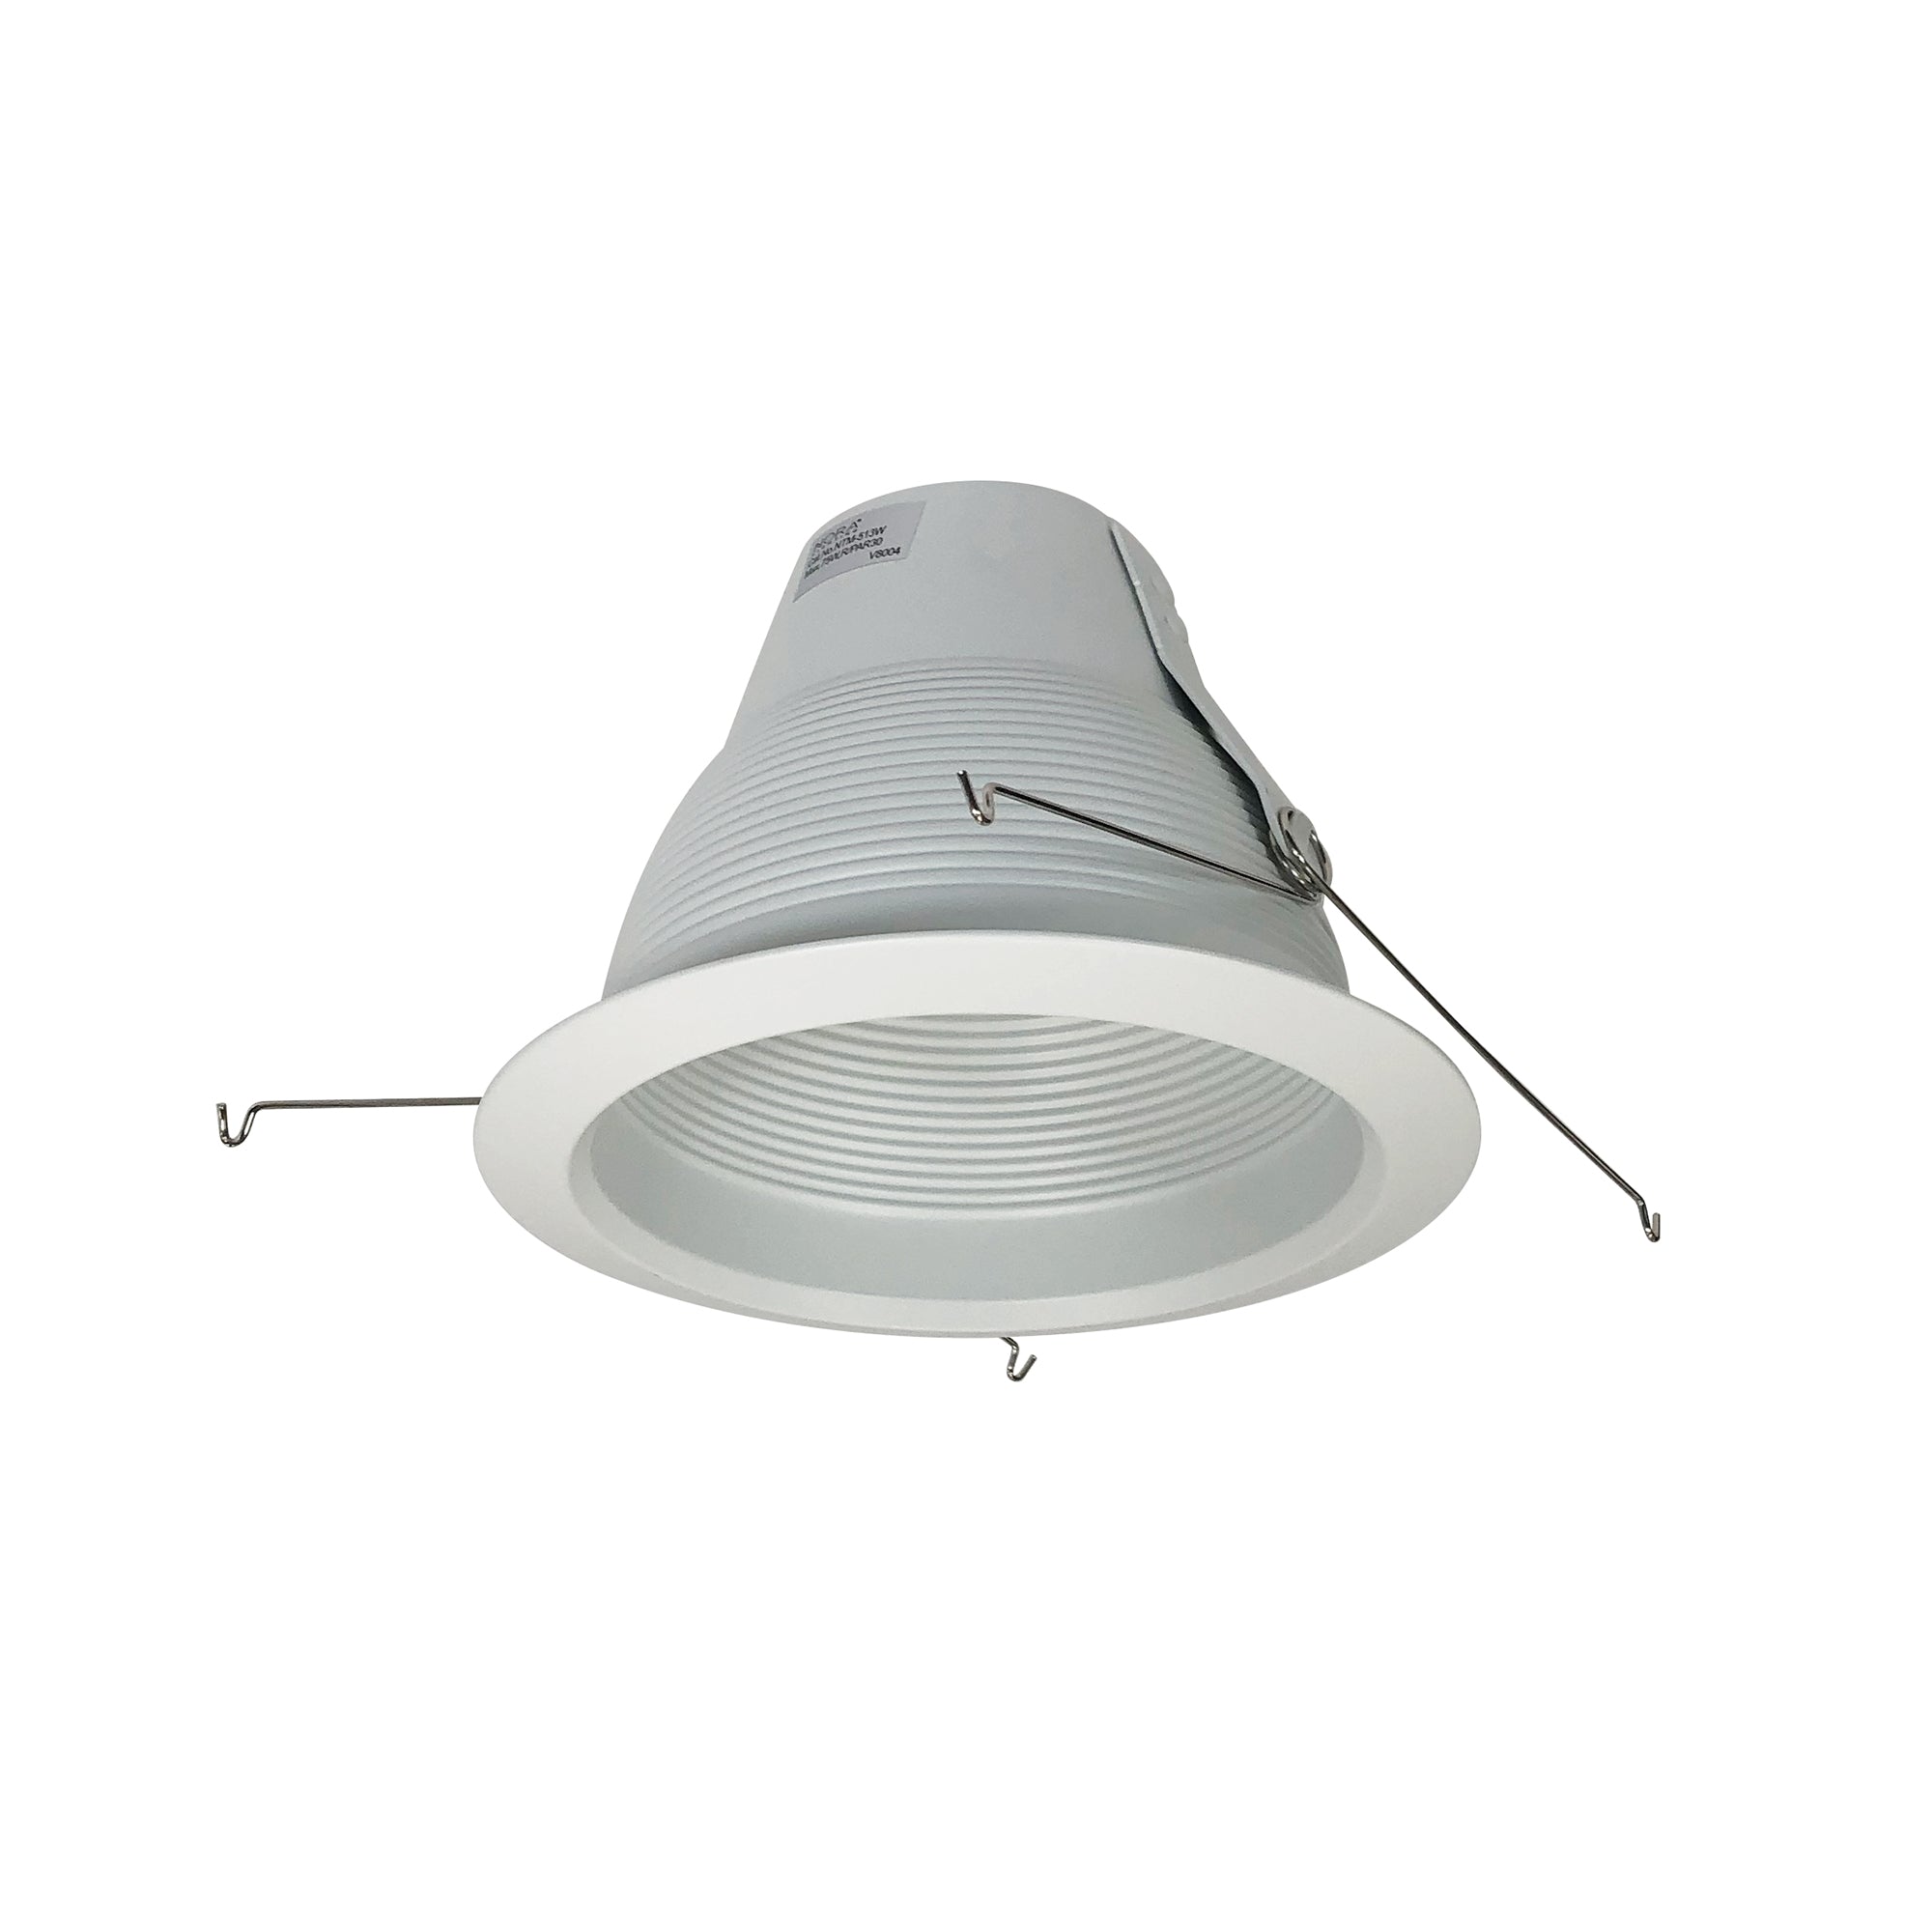 Nora Lighting NTM-513W - Recessed - 5 Inch Air-Tight Black White Cone w/ White Flange